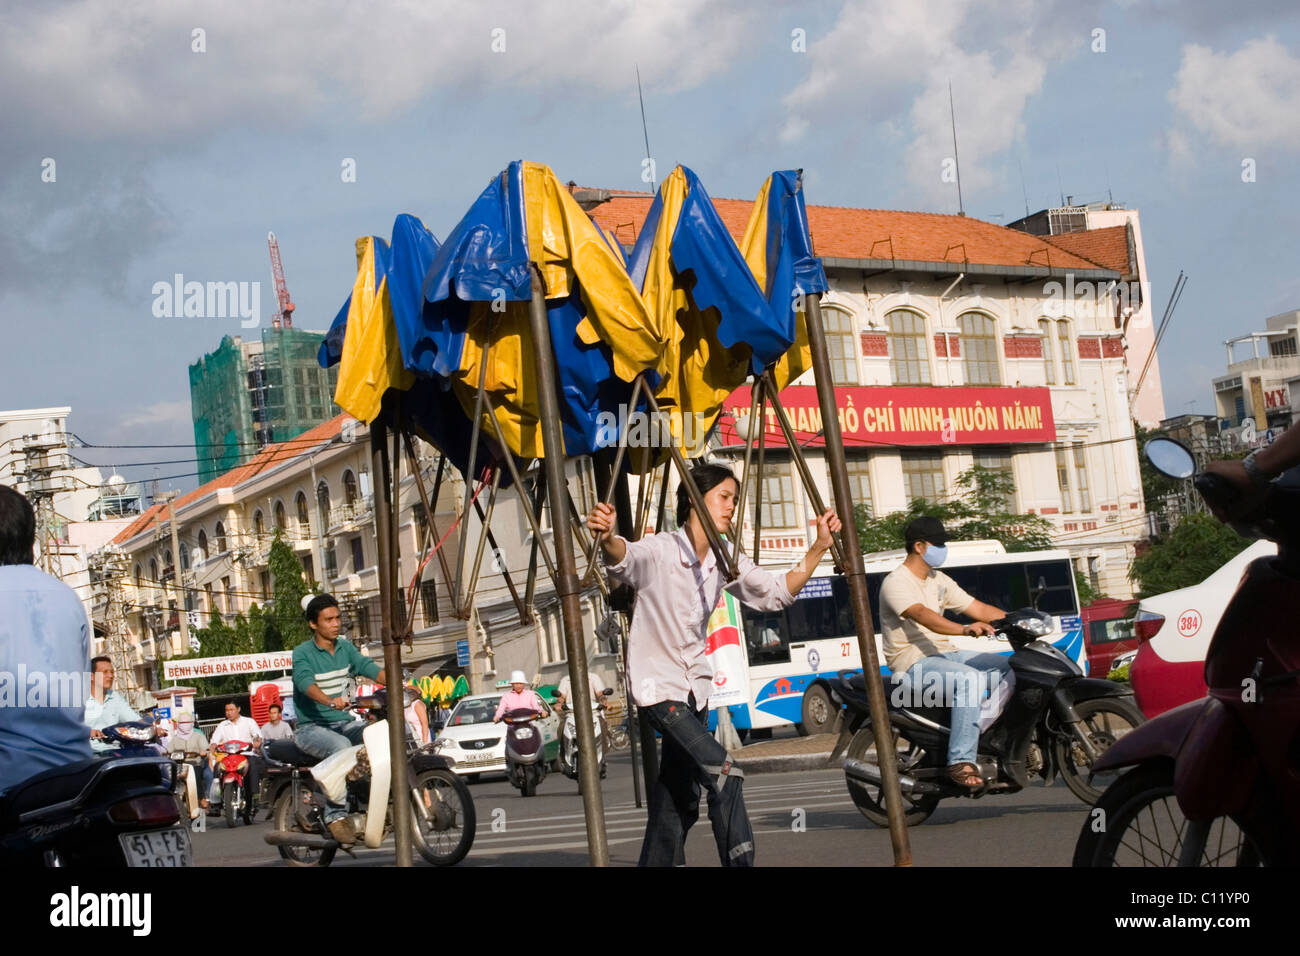 A woman is carrying a portable tent to a nearby night market on a busy street with heavy traffic in Saigon (Ho Chi Minh City) Vi Stock Photo